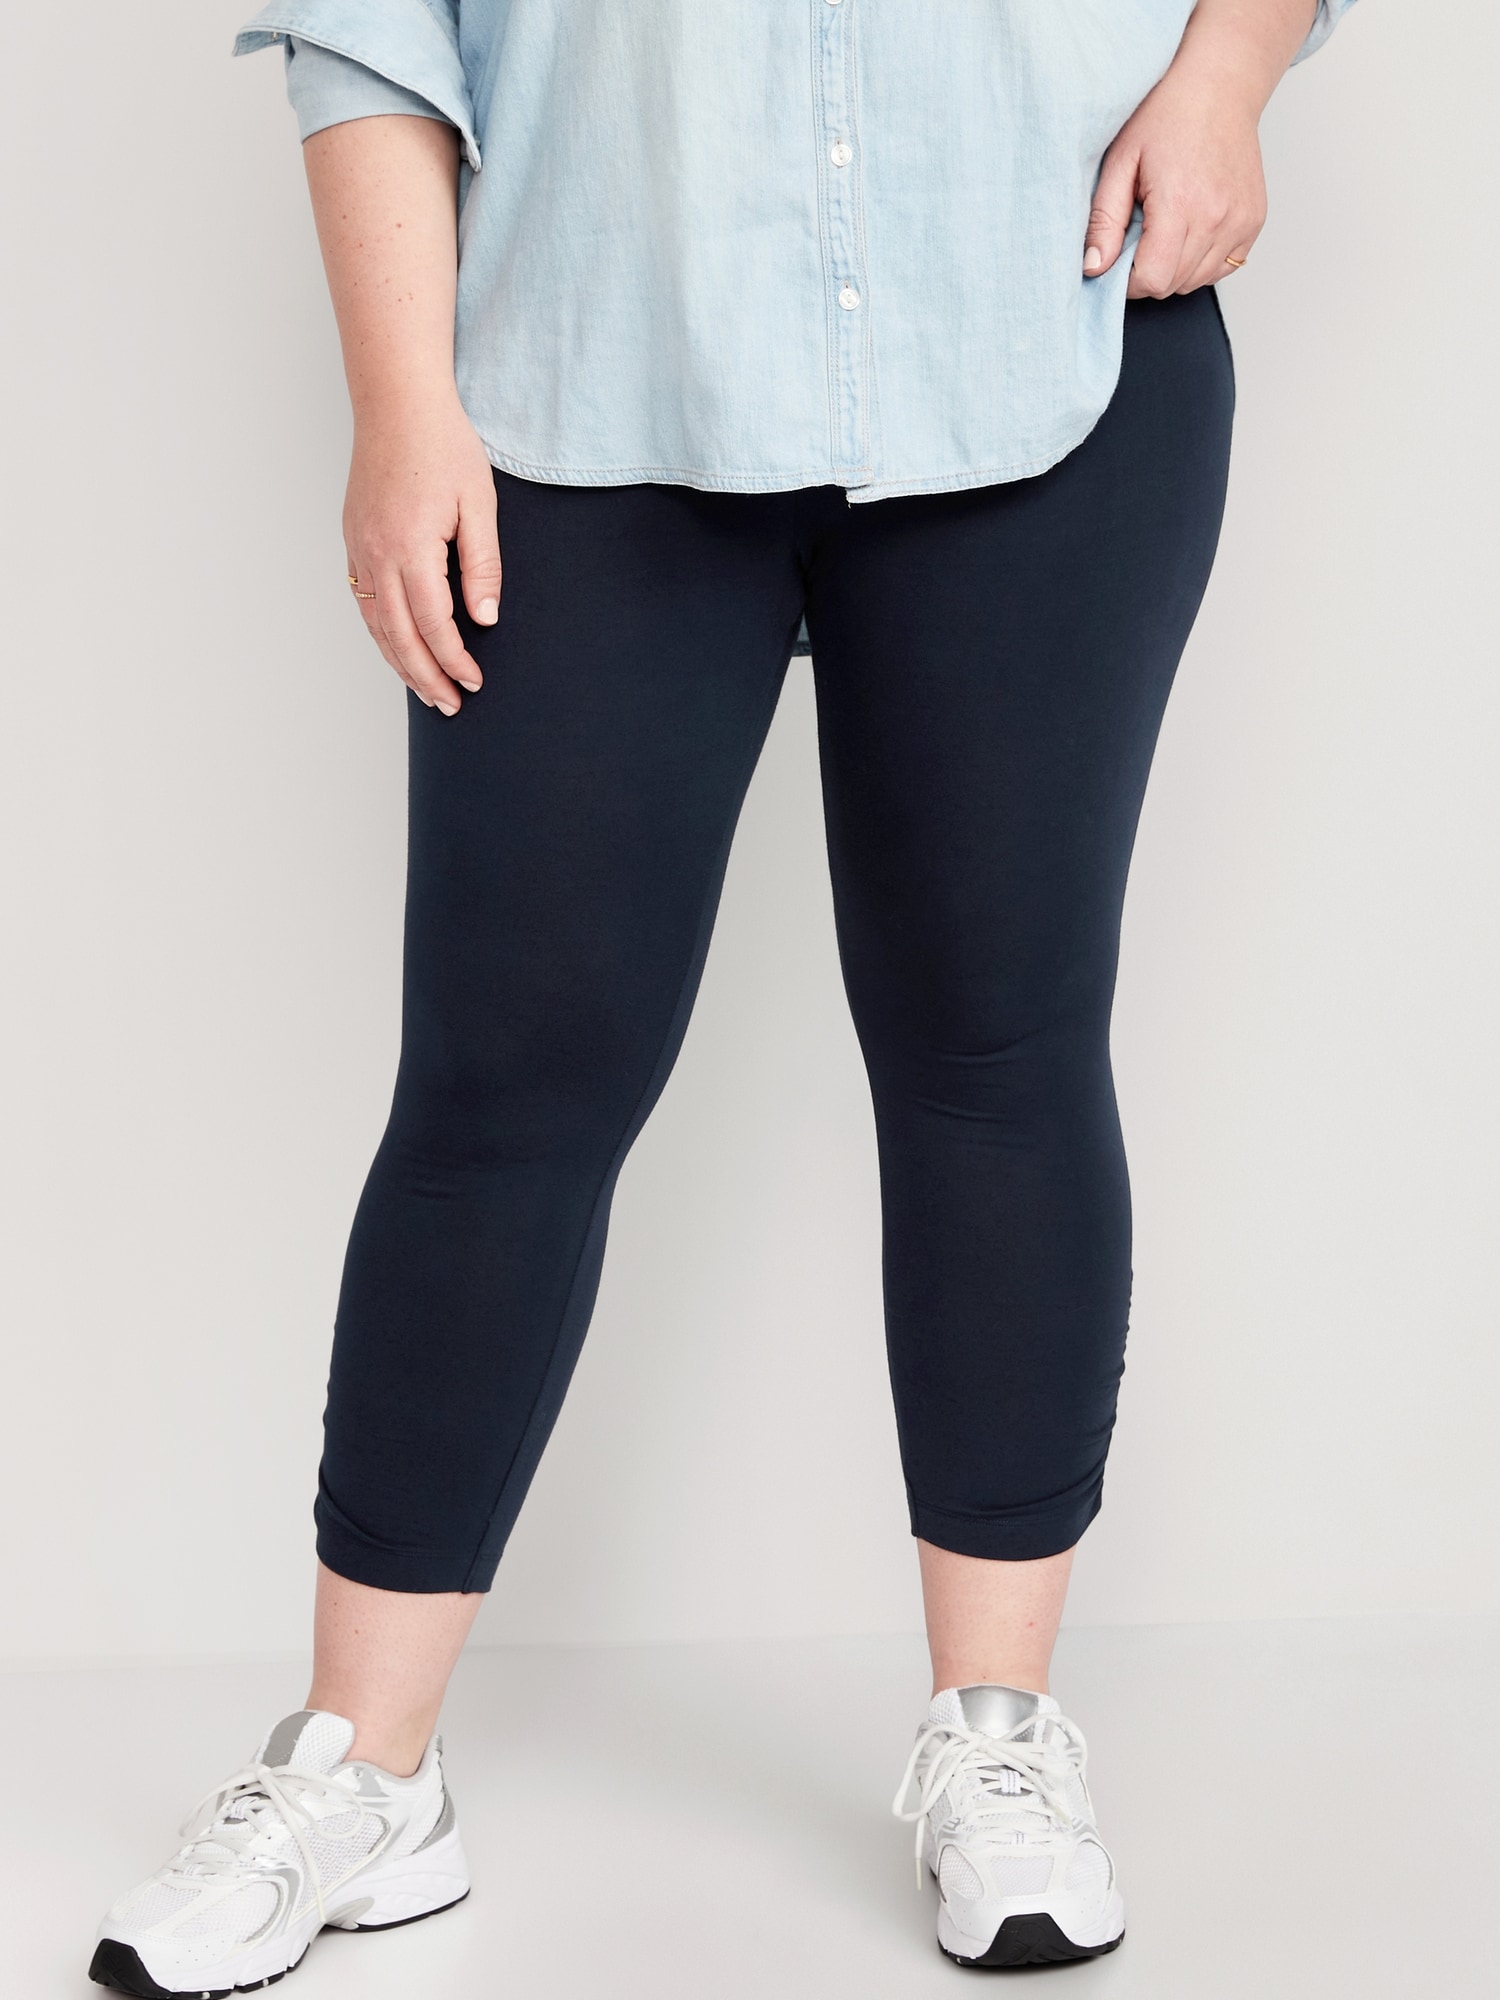 High-Waisted Cropped Ruched Leggings for Women | Old Navy